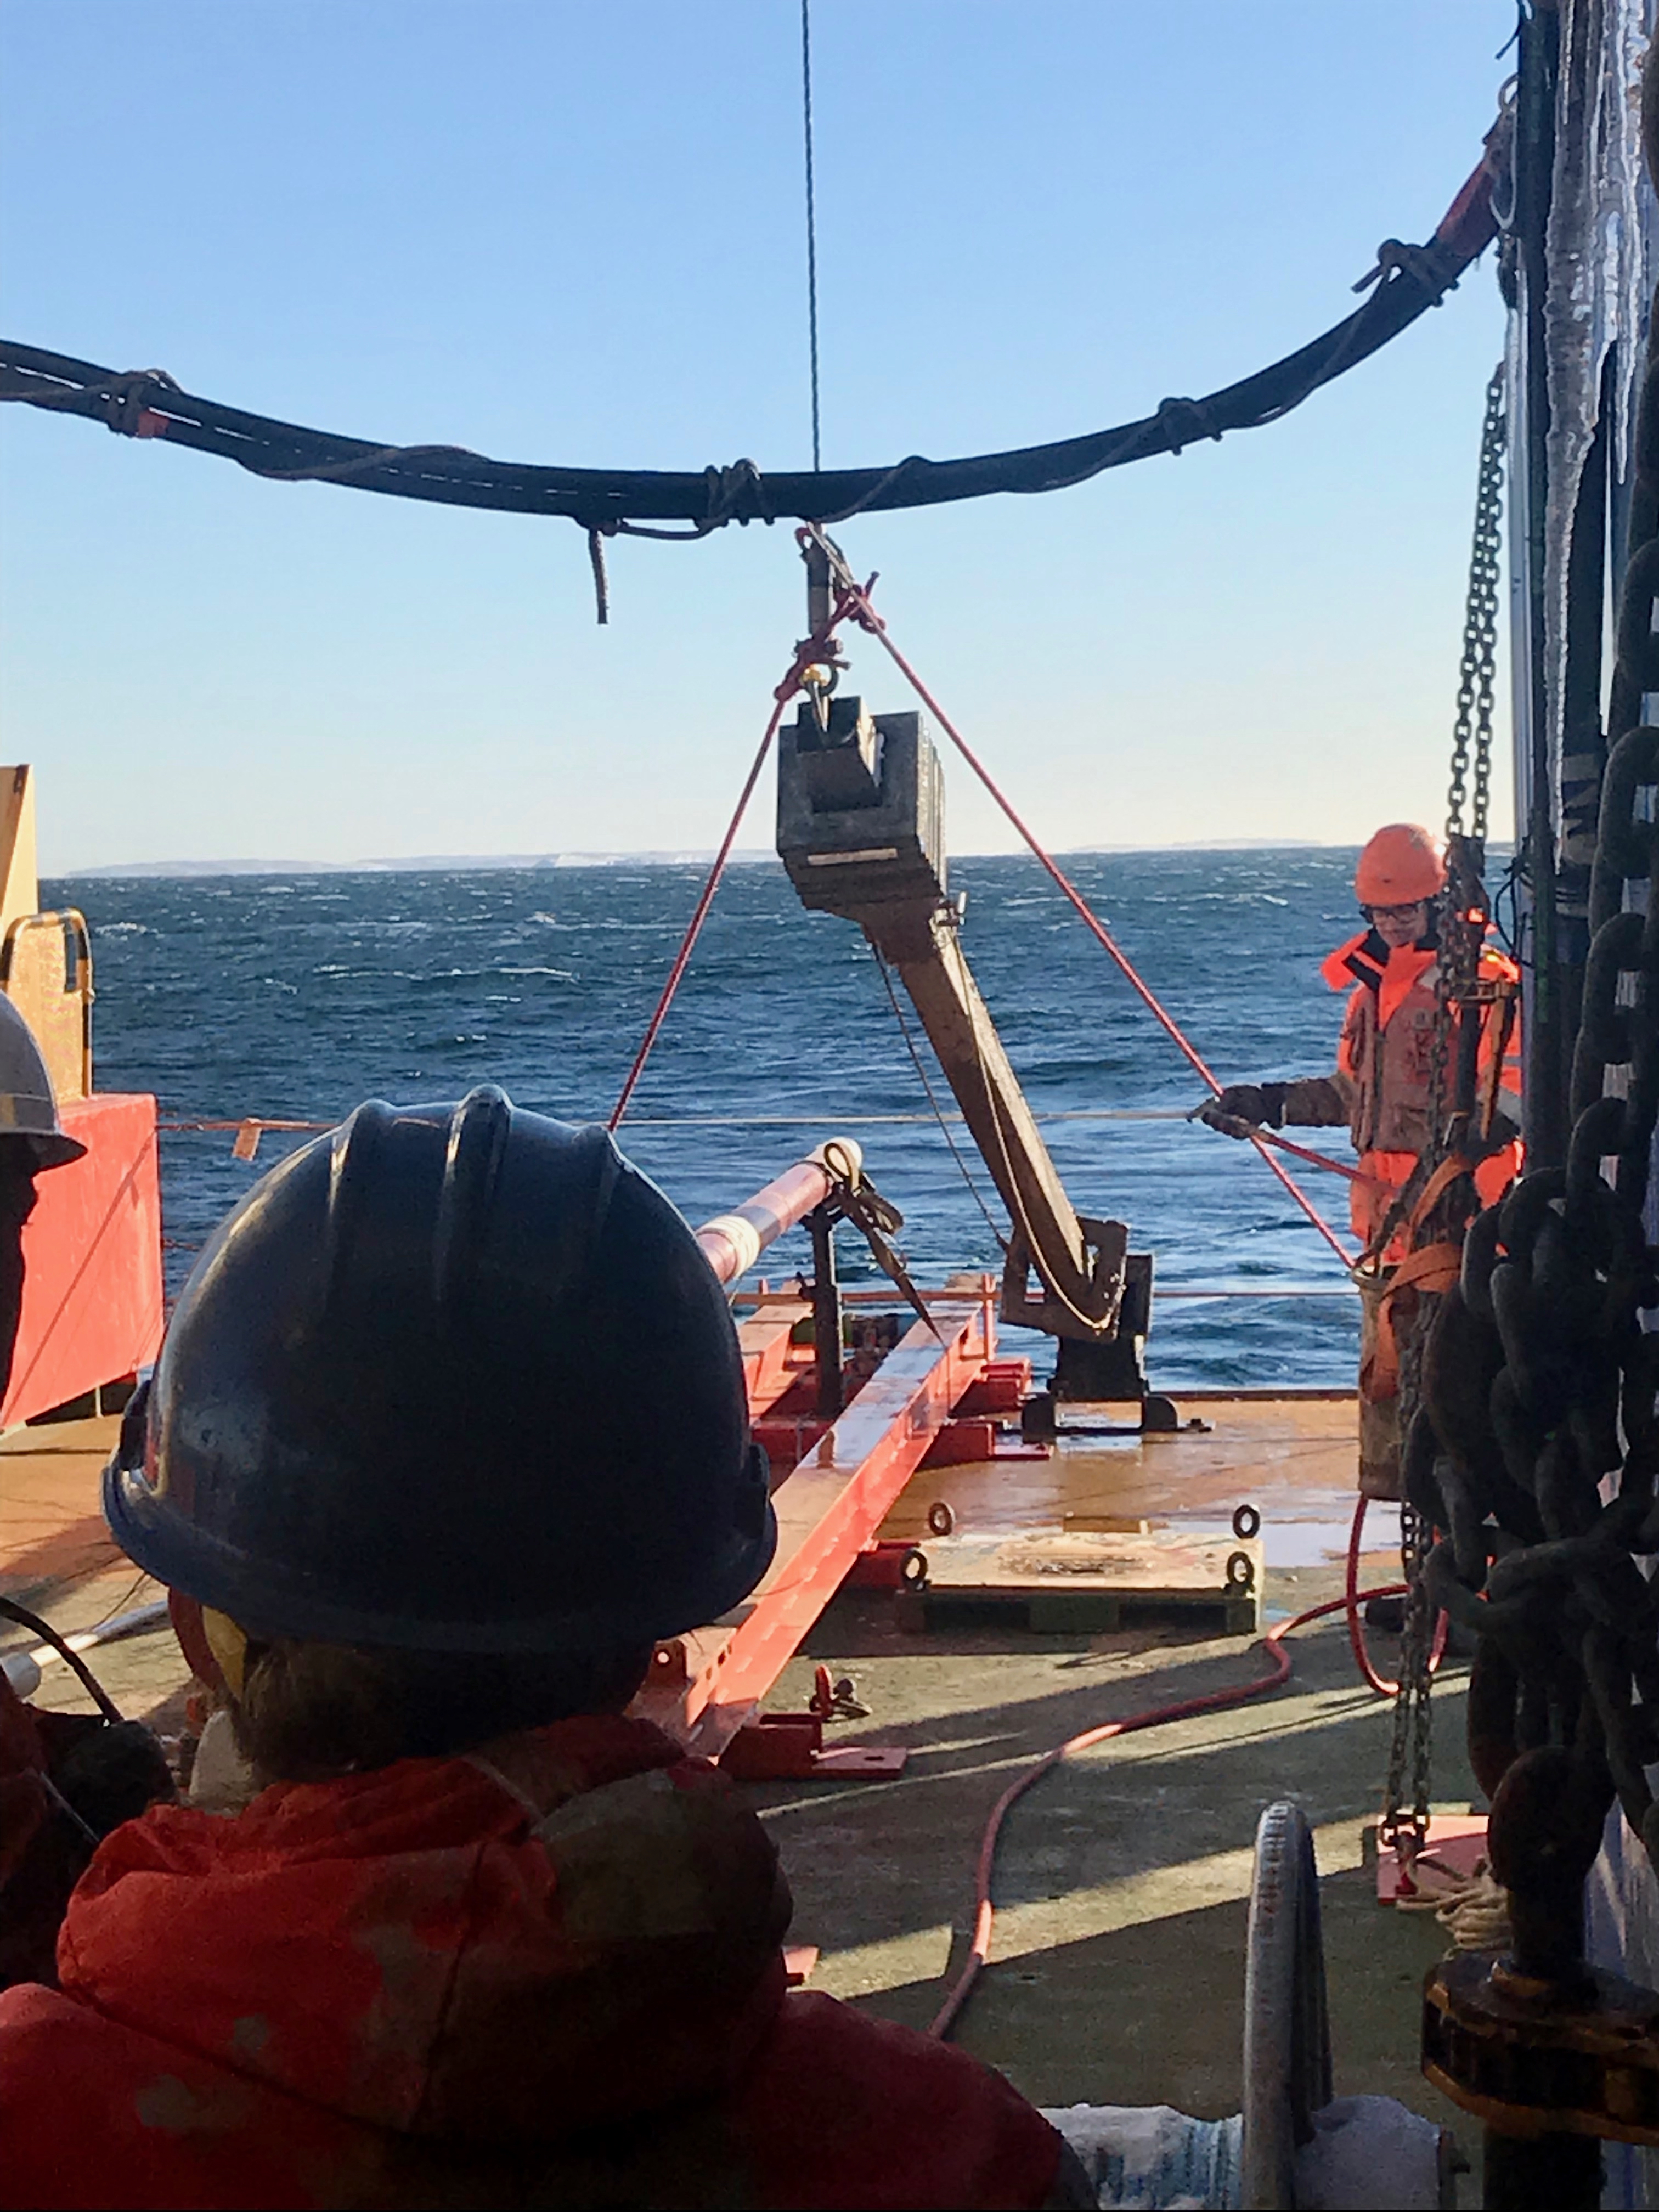 Peter Sheehan helps to secure and hose off the Kasten core just brought back up from the seafloor. Becky Minzoni waits excitedly for the core to be secured on the ship so that her team can open up the core to see if they successfully captured a sediment core.